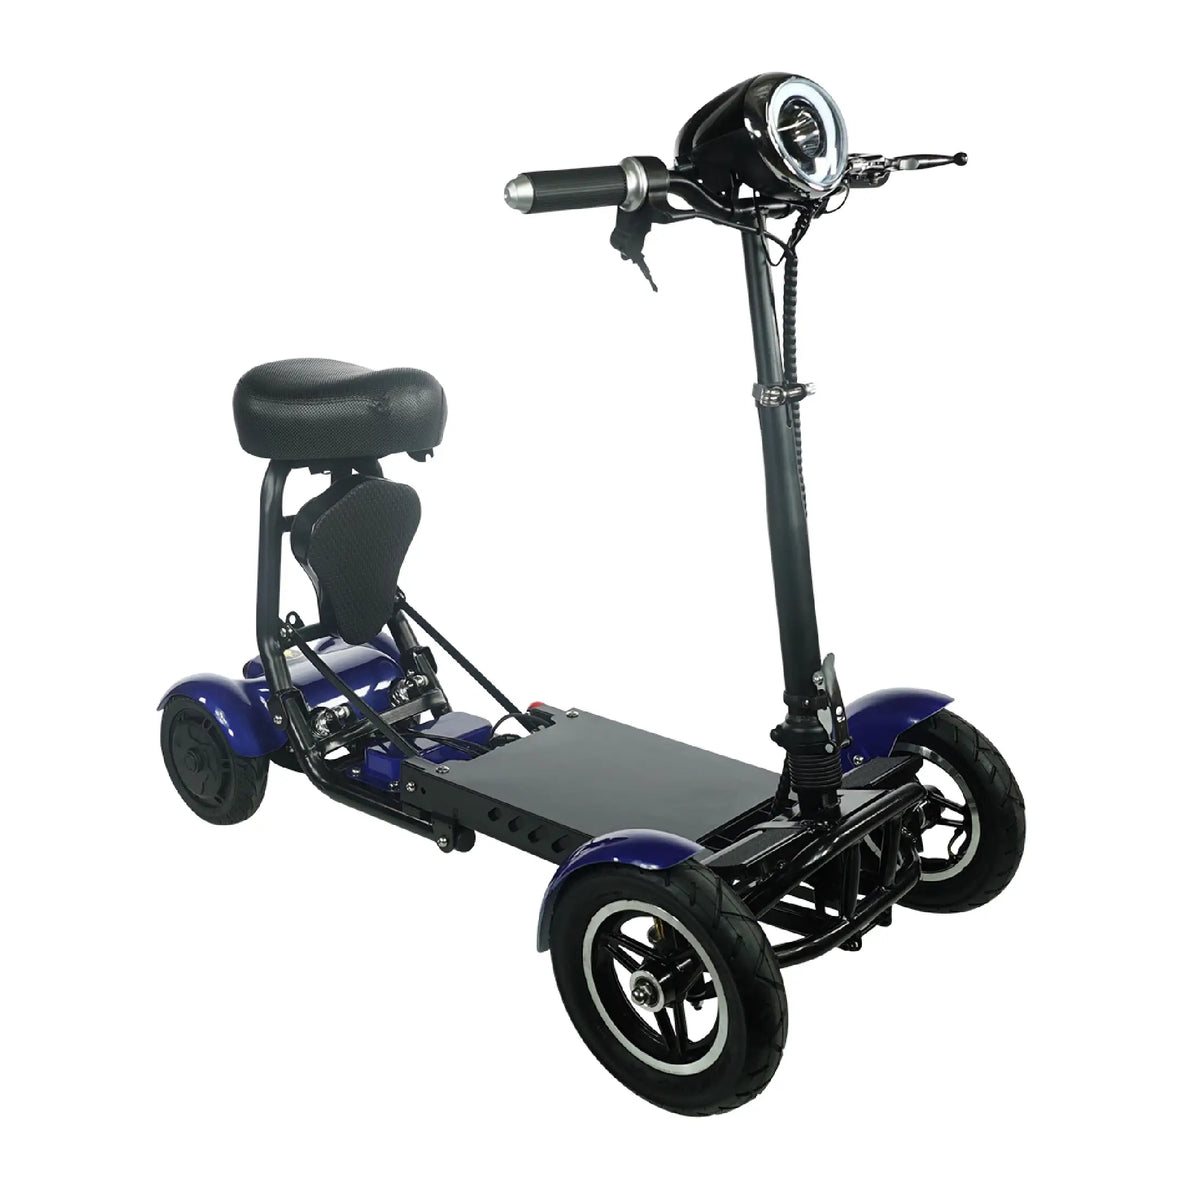 MS-3000 Foldable Mobility Scooter